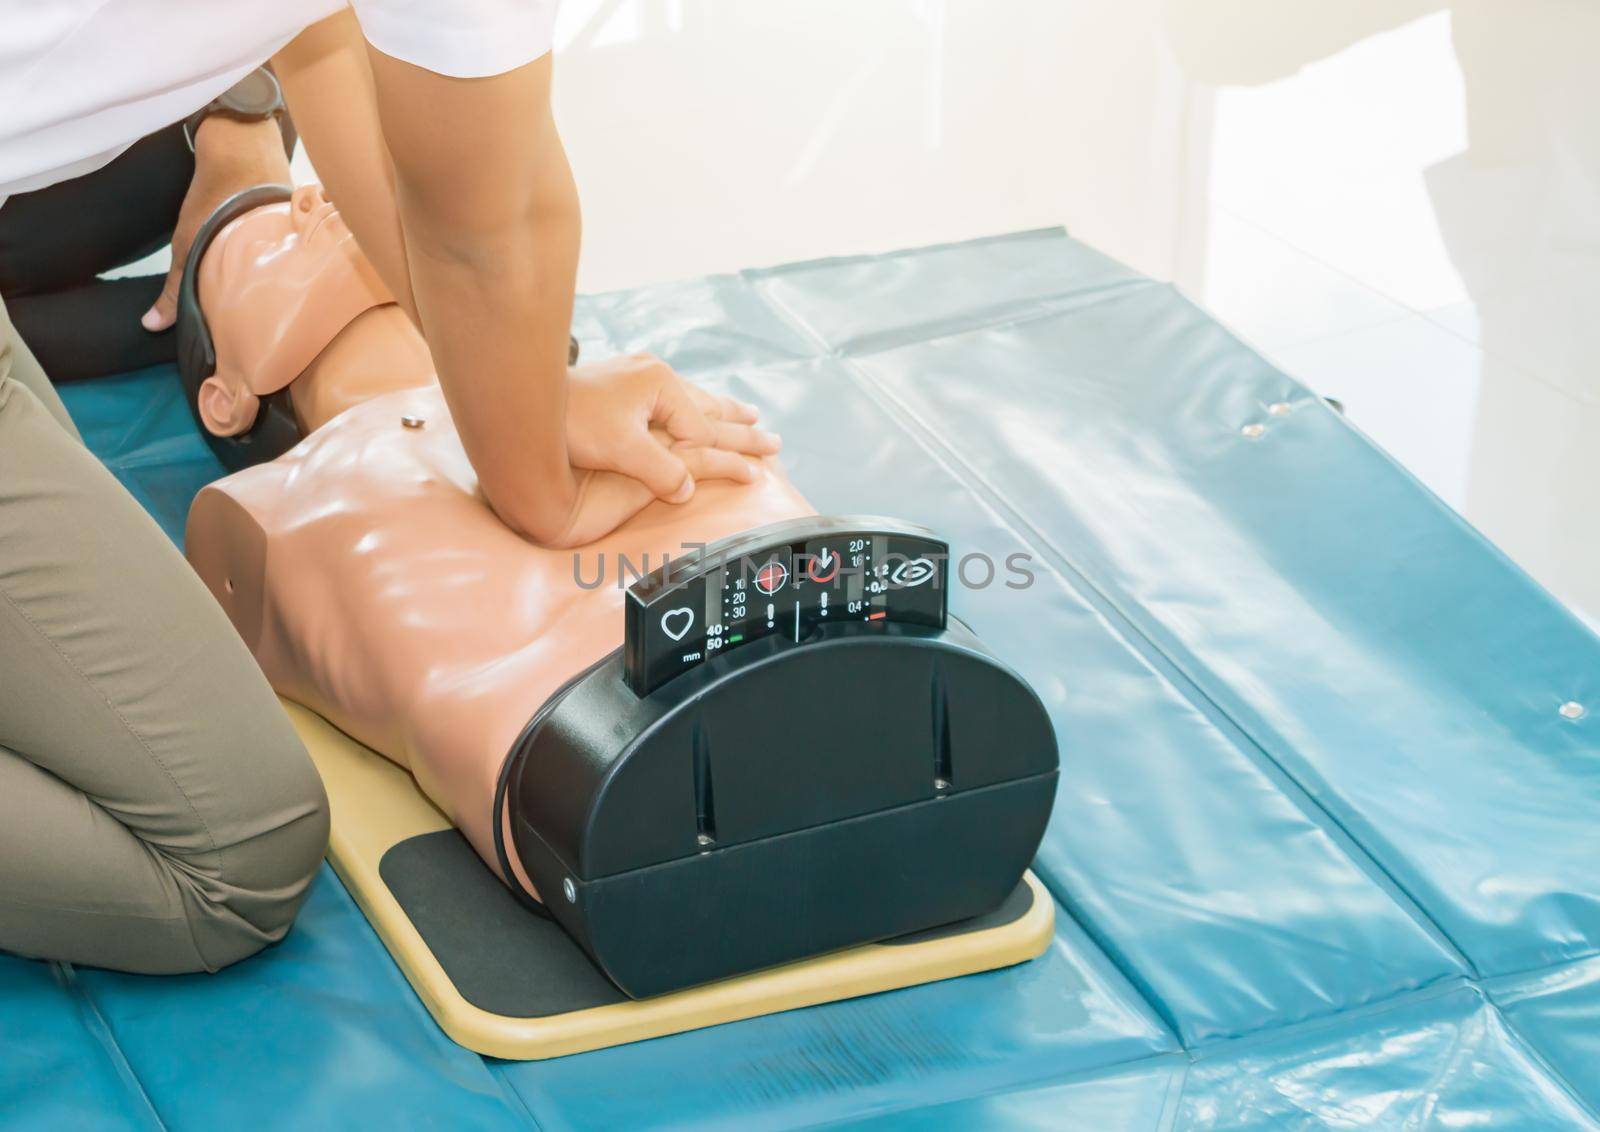 CPR aid dummy medical training with hand press Heart on doll emergency refresher training Concept closed-up. by pramot